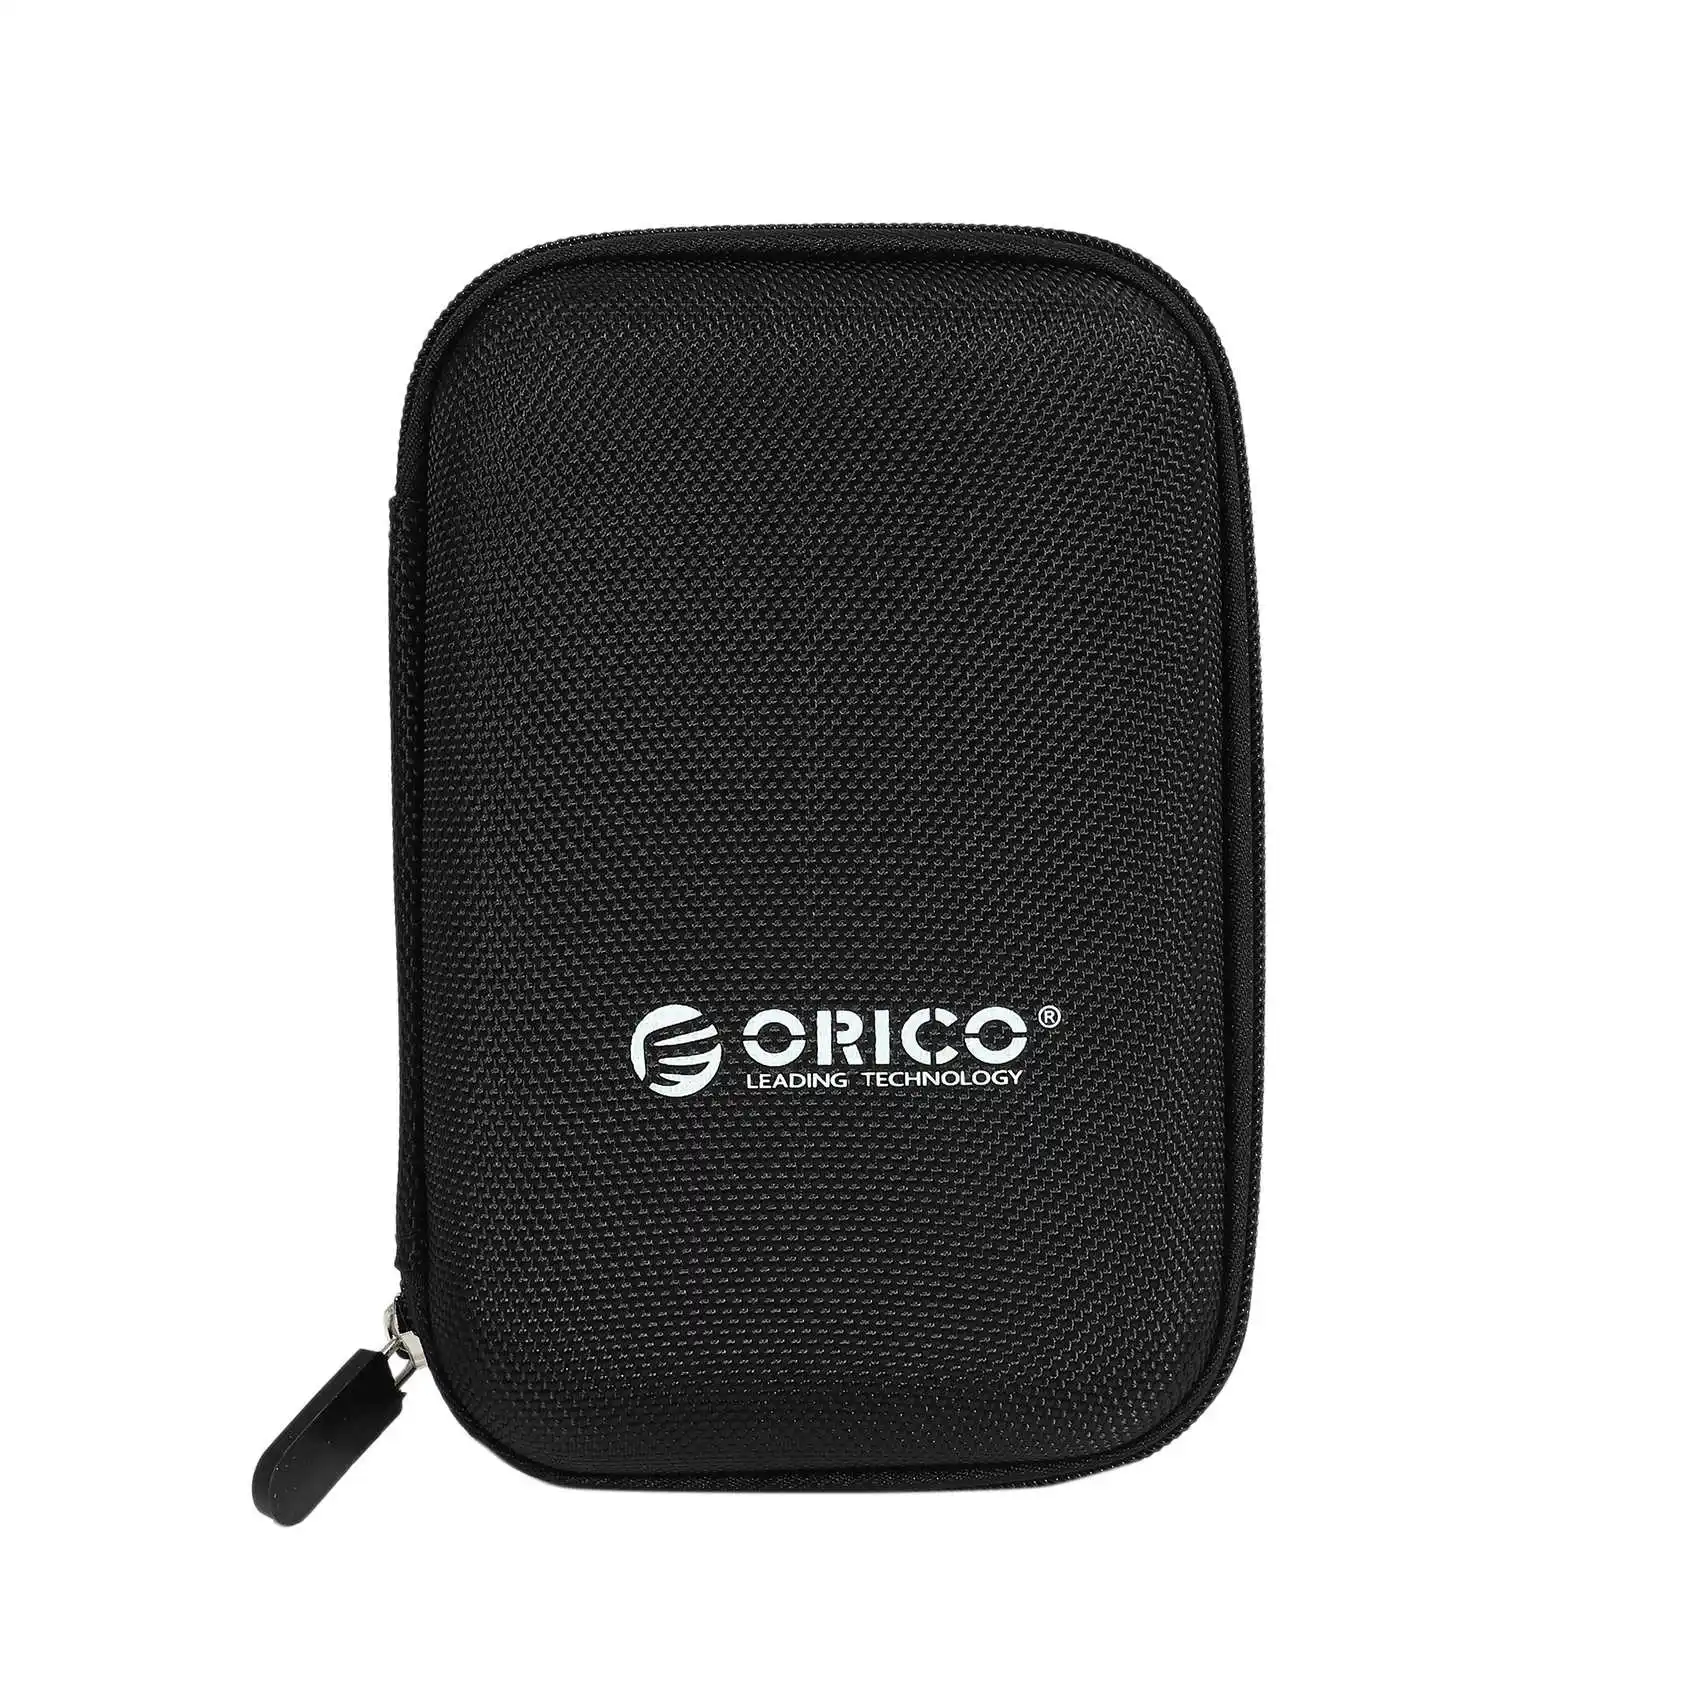 

Orico Phd-25 2.5 Inch Hdd Protection Bag Box For External Hard Drive Storage Protection Case For Hdd Ssd（Black）